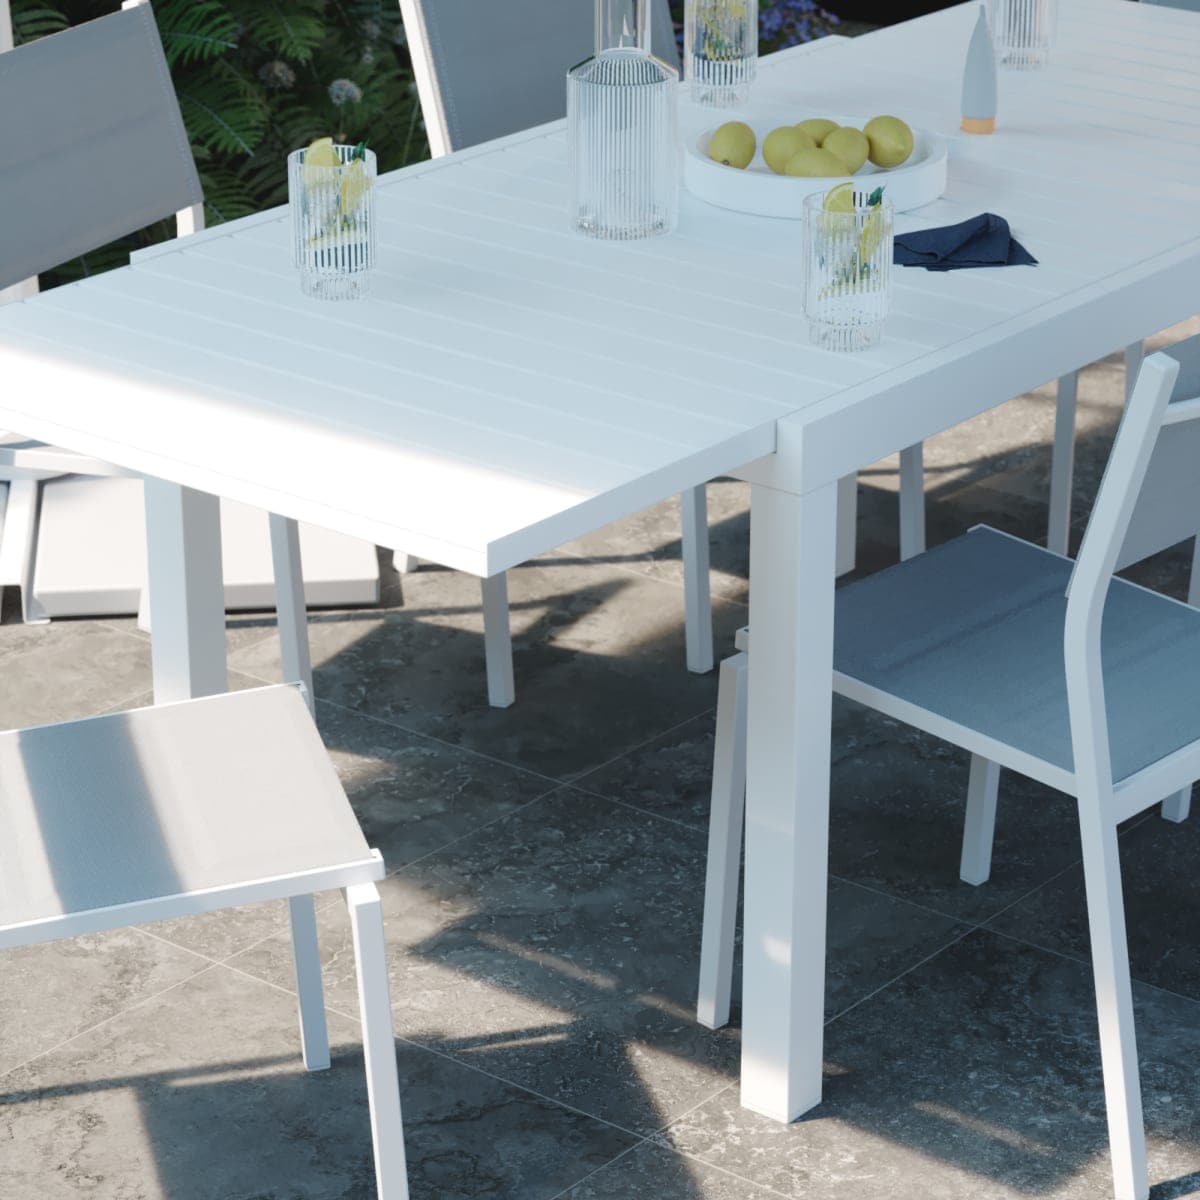 TABLE NATERIAL LYRA II UP AND DOWN ALUMINIUM 130/214.5X90 WHITE - best price from Maltashopper.com BR500015309